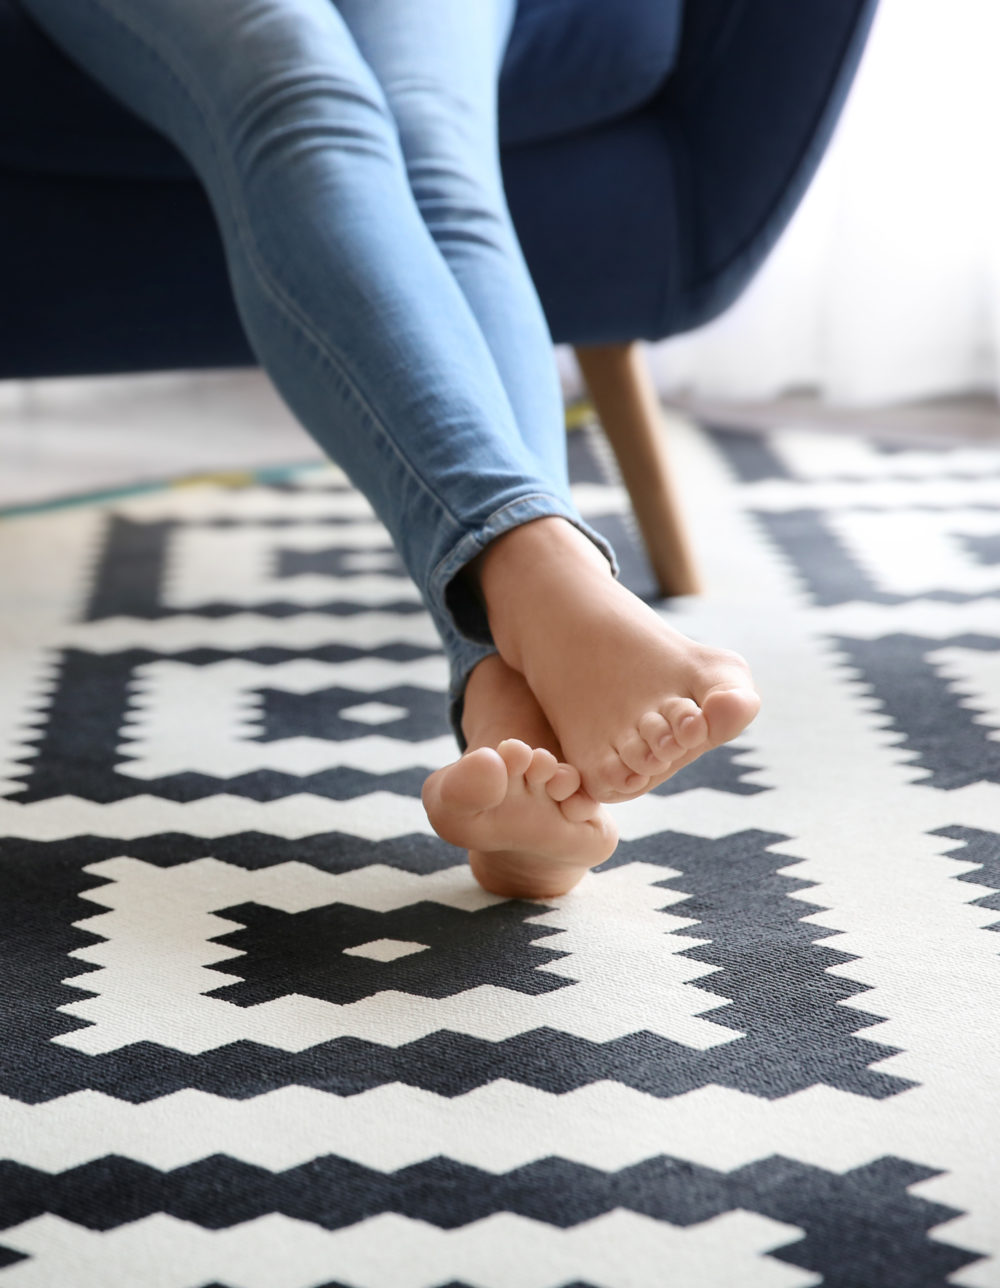 Woman Sitting In Armchair With Feet On Carpet At Home